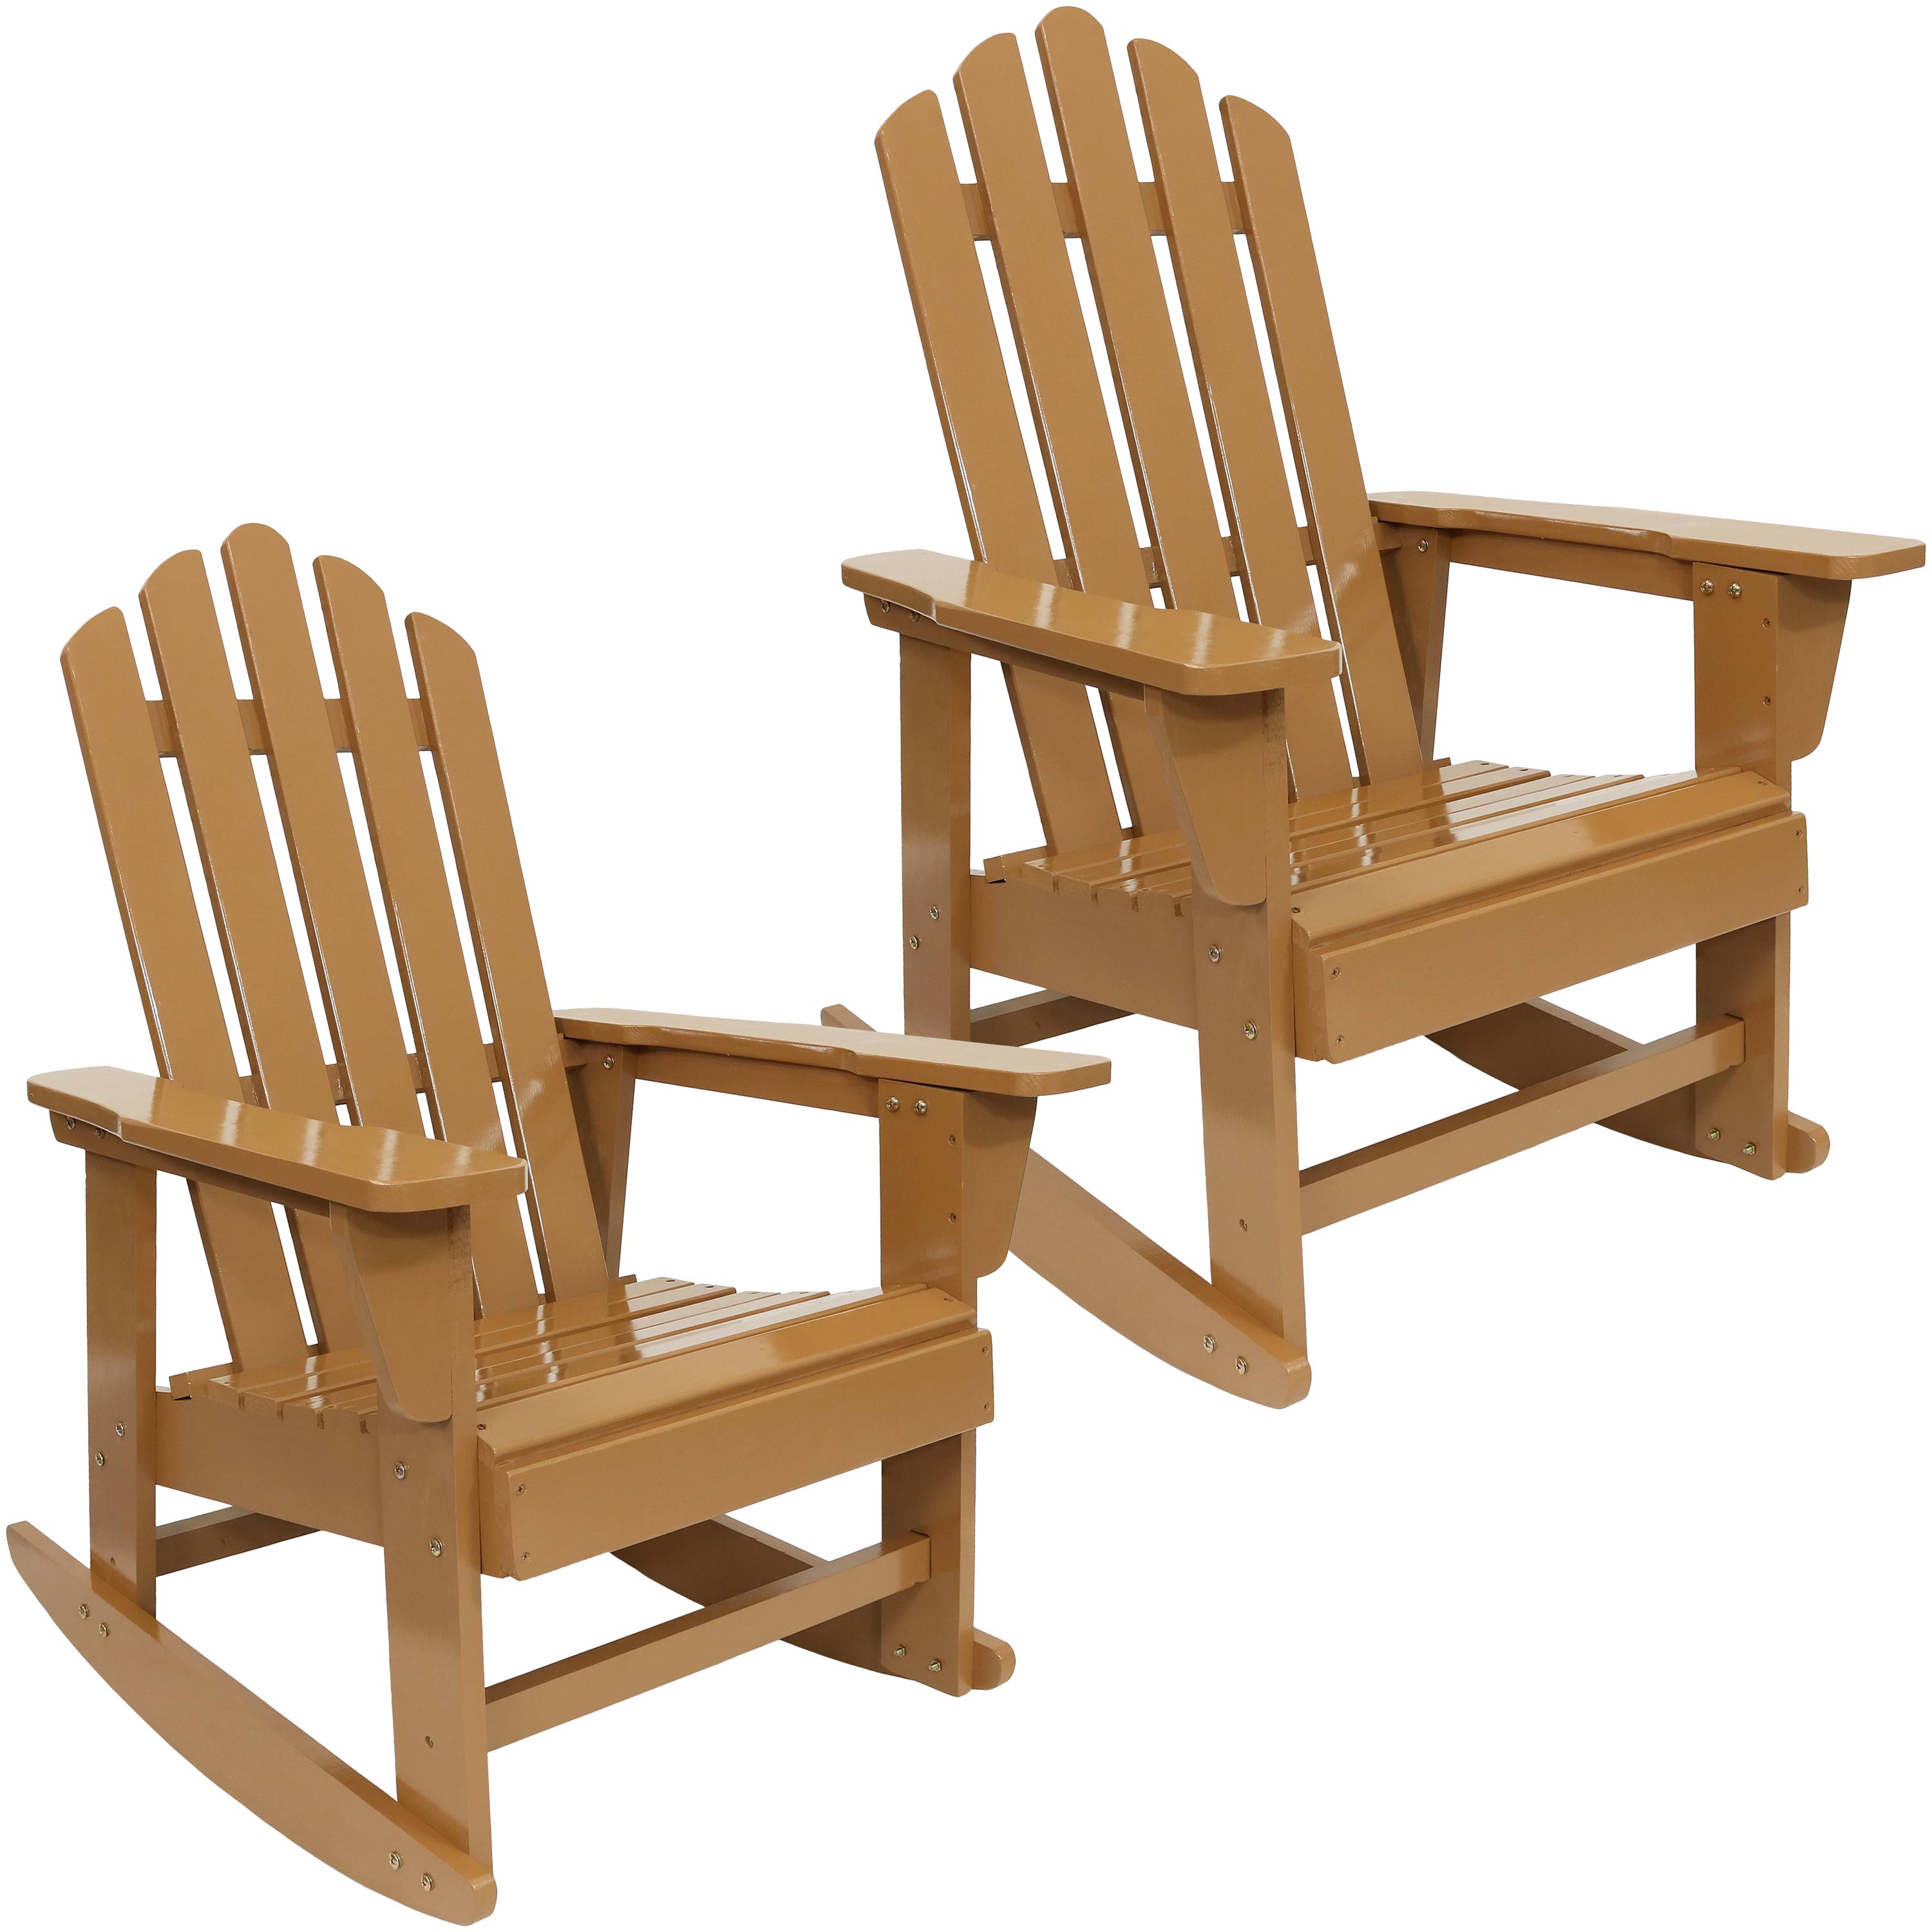 Sunnydaze Outdoor Wooden Adirondack Rocking Chair with Cedar Finish - Set of 2 - image 1 of 8